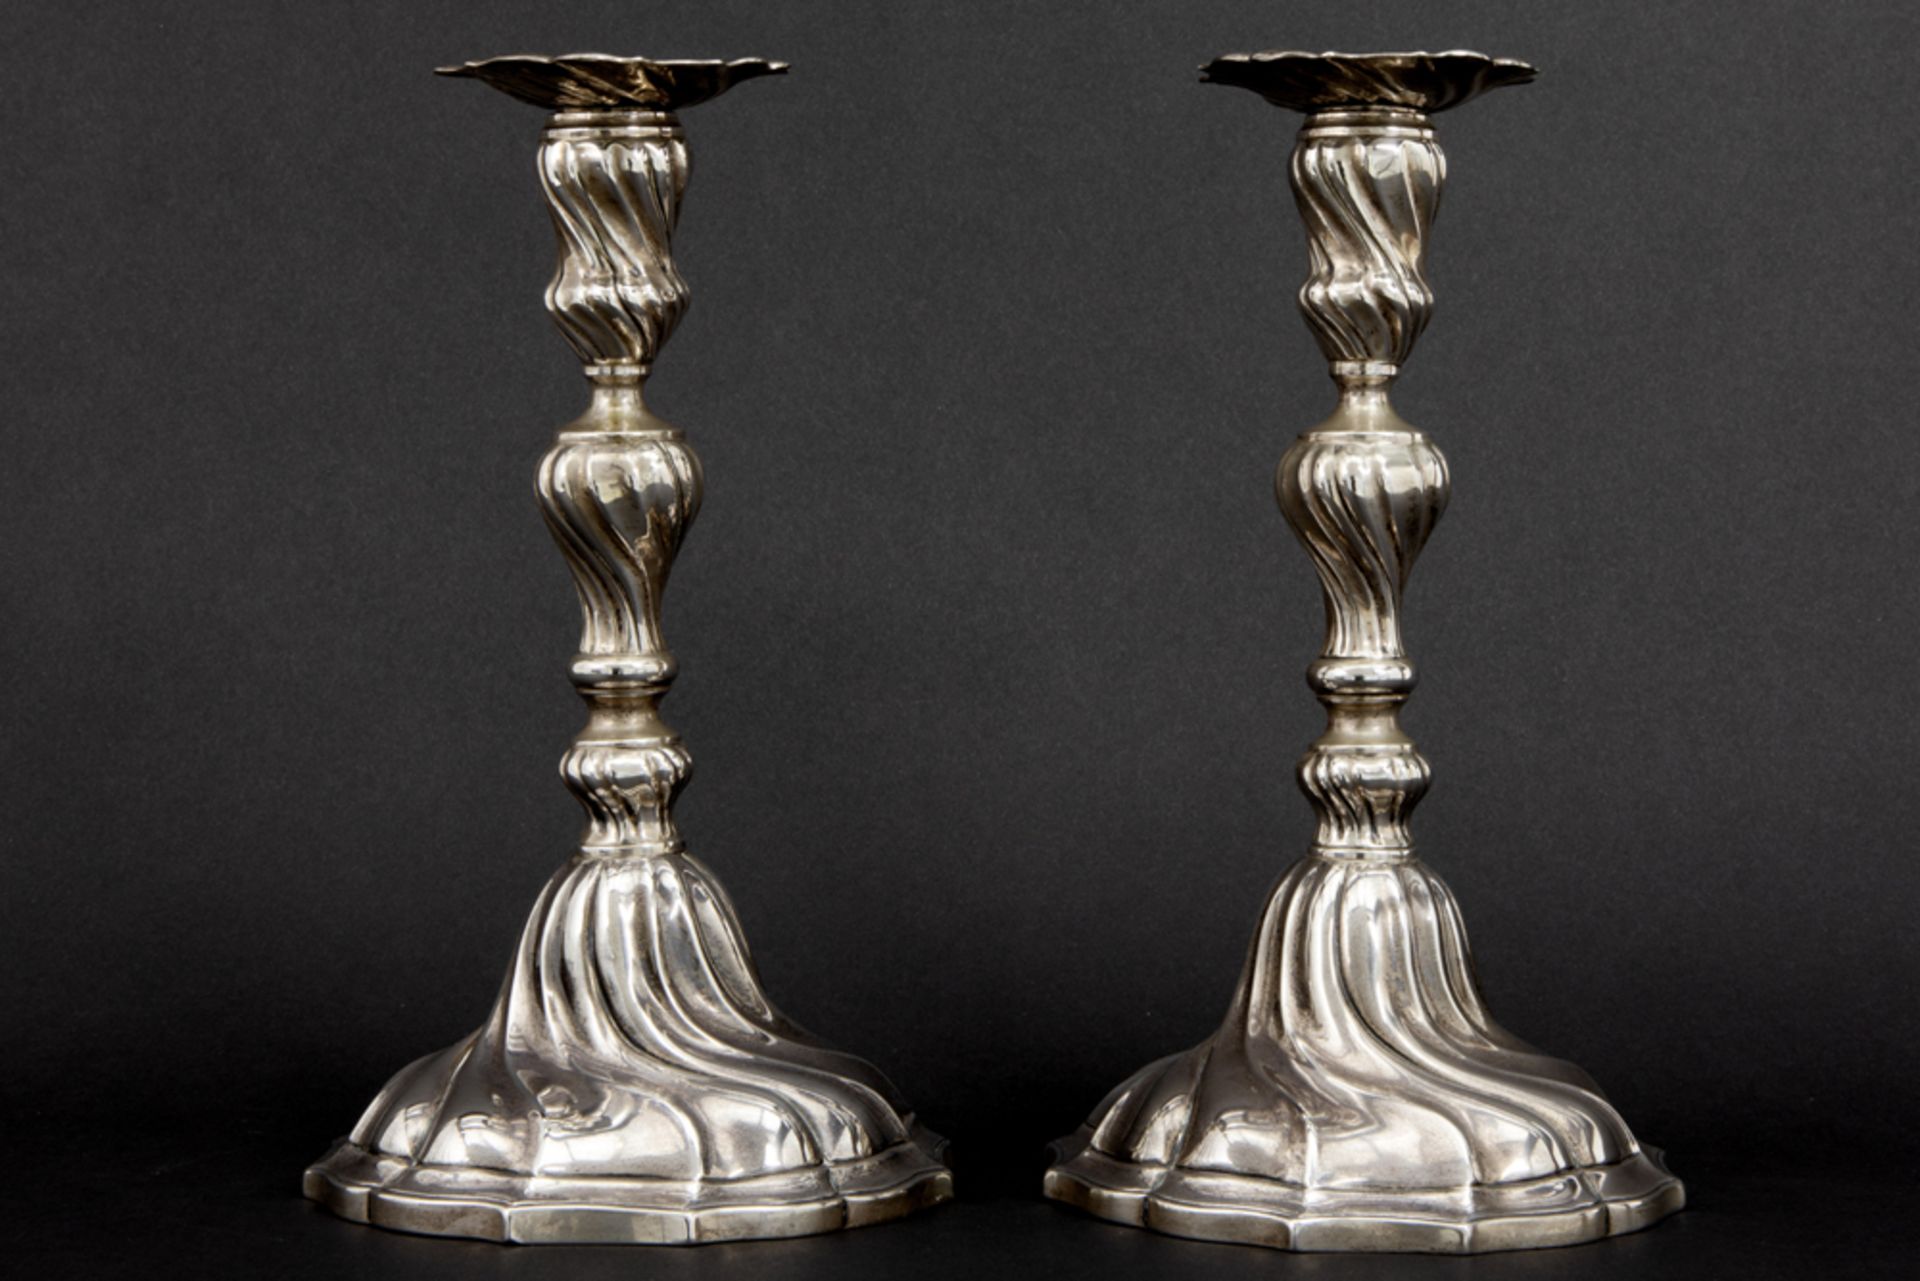 pair of Belgian "Delheid" signed candlesticks in marked silver with a Louis XV style design ||